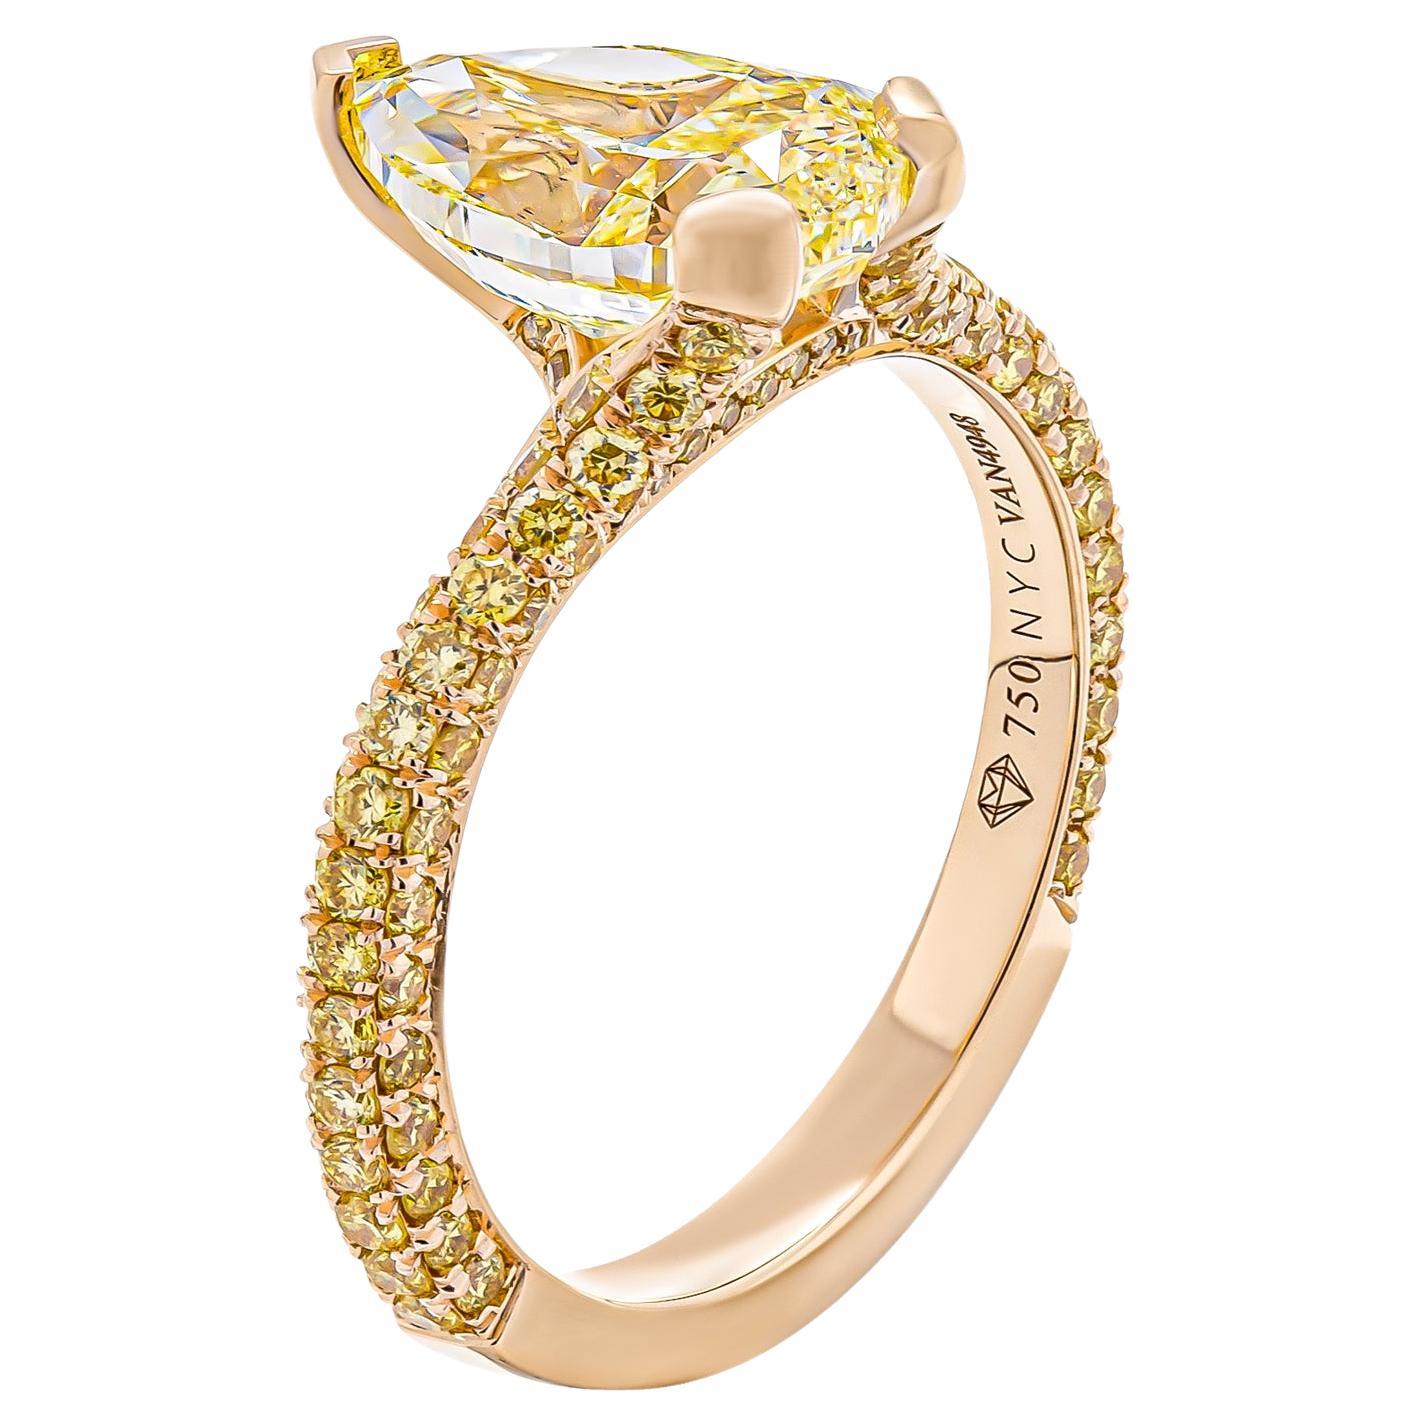 Engagement Ring with 2.01ct Fancy Yellow Pear Shape Diamond